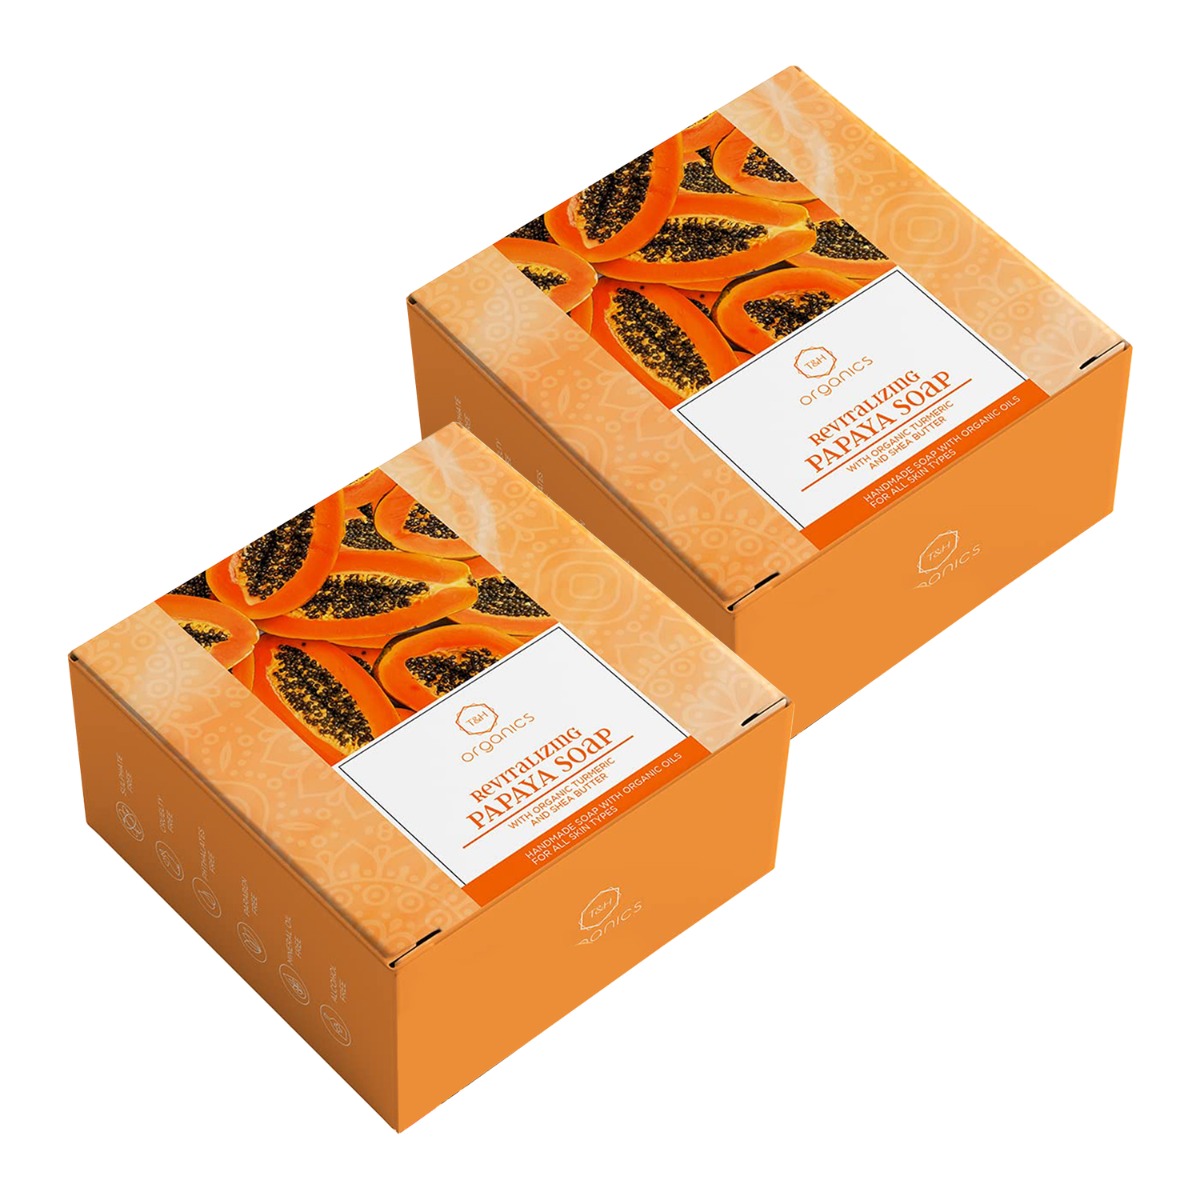 T&H Organics Revitalizing Papaya Soap With Turmeric And Shea Butter - Pack Of 2, 125gm Each